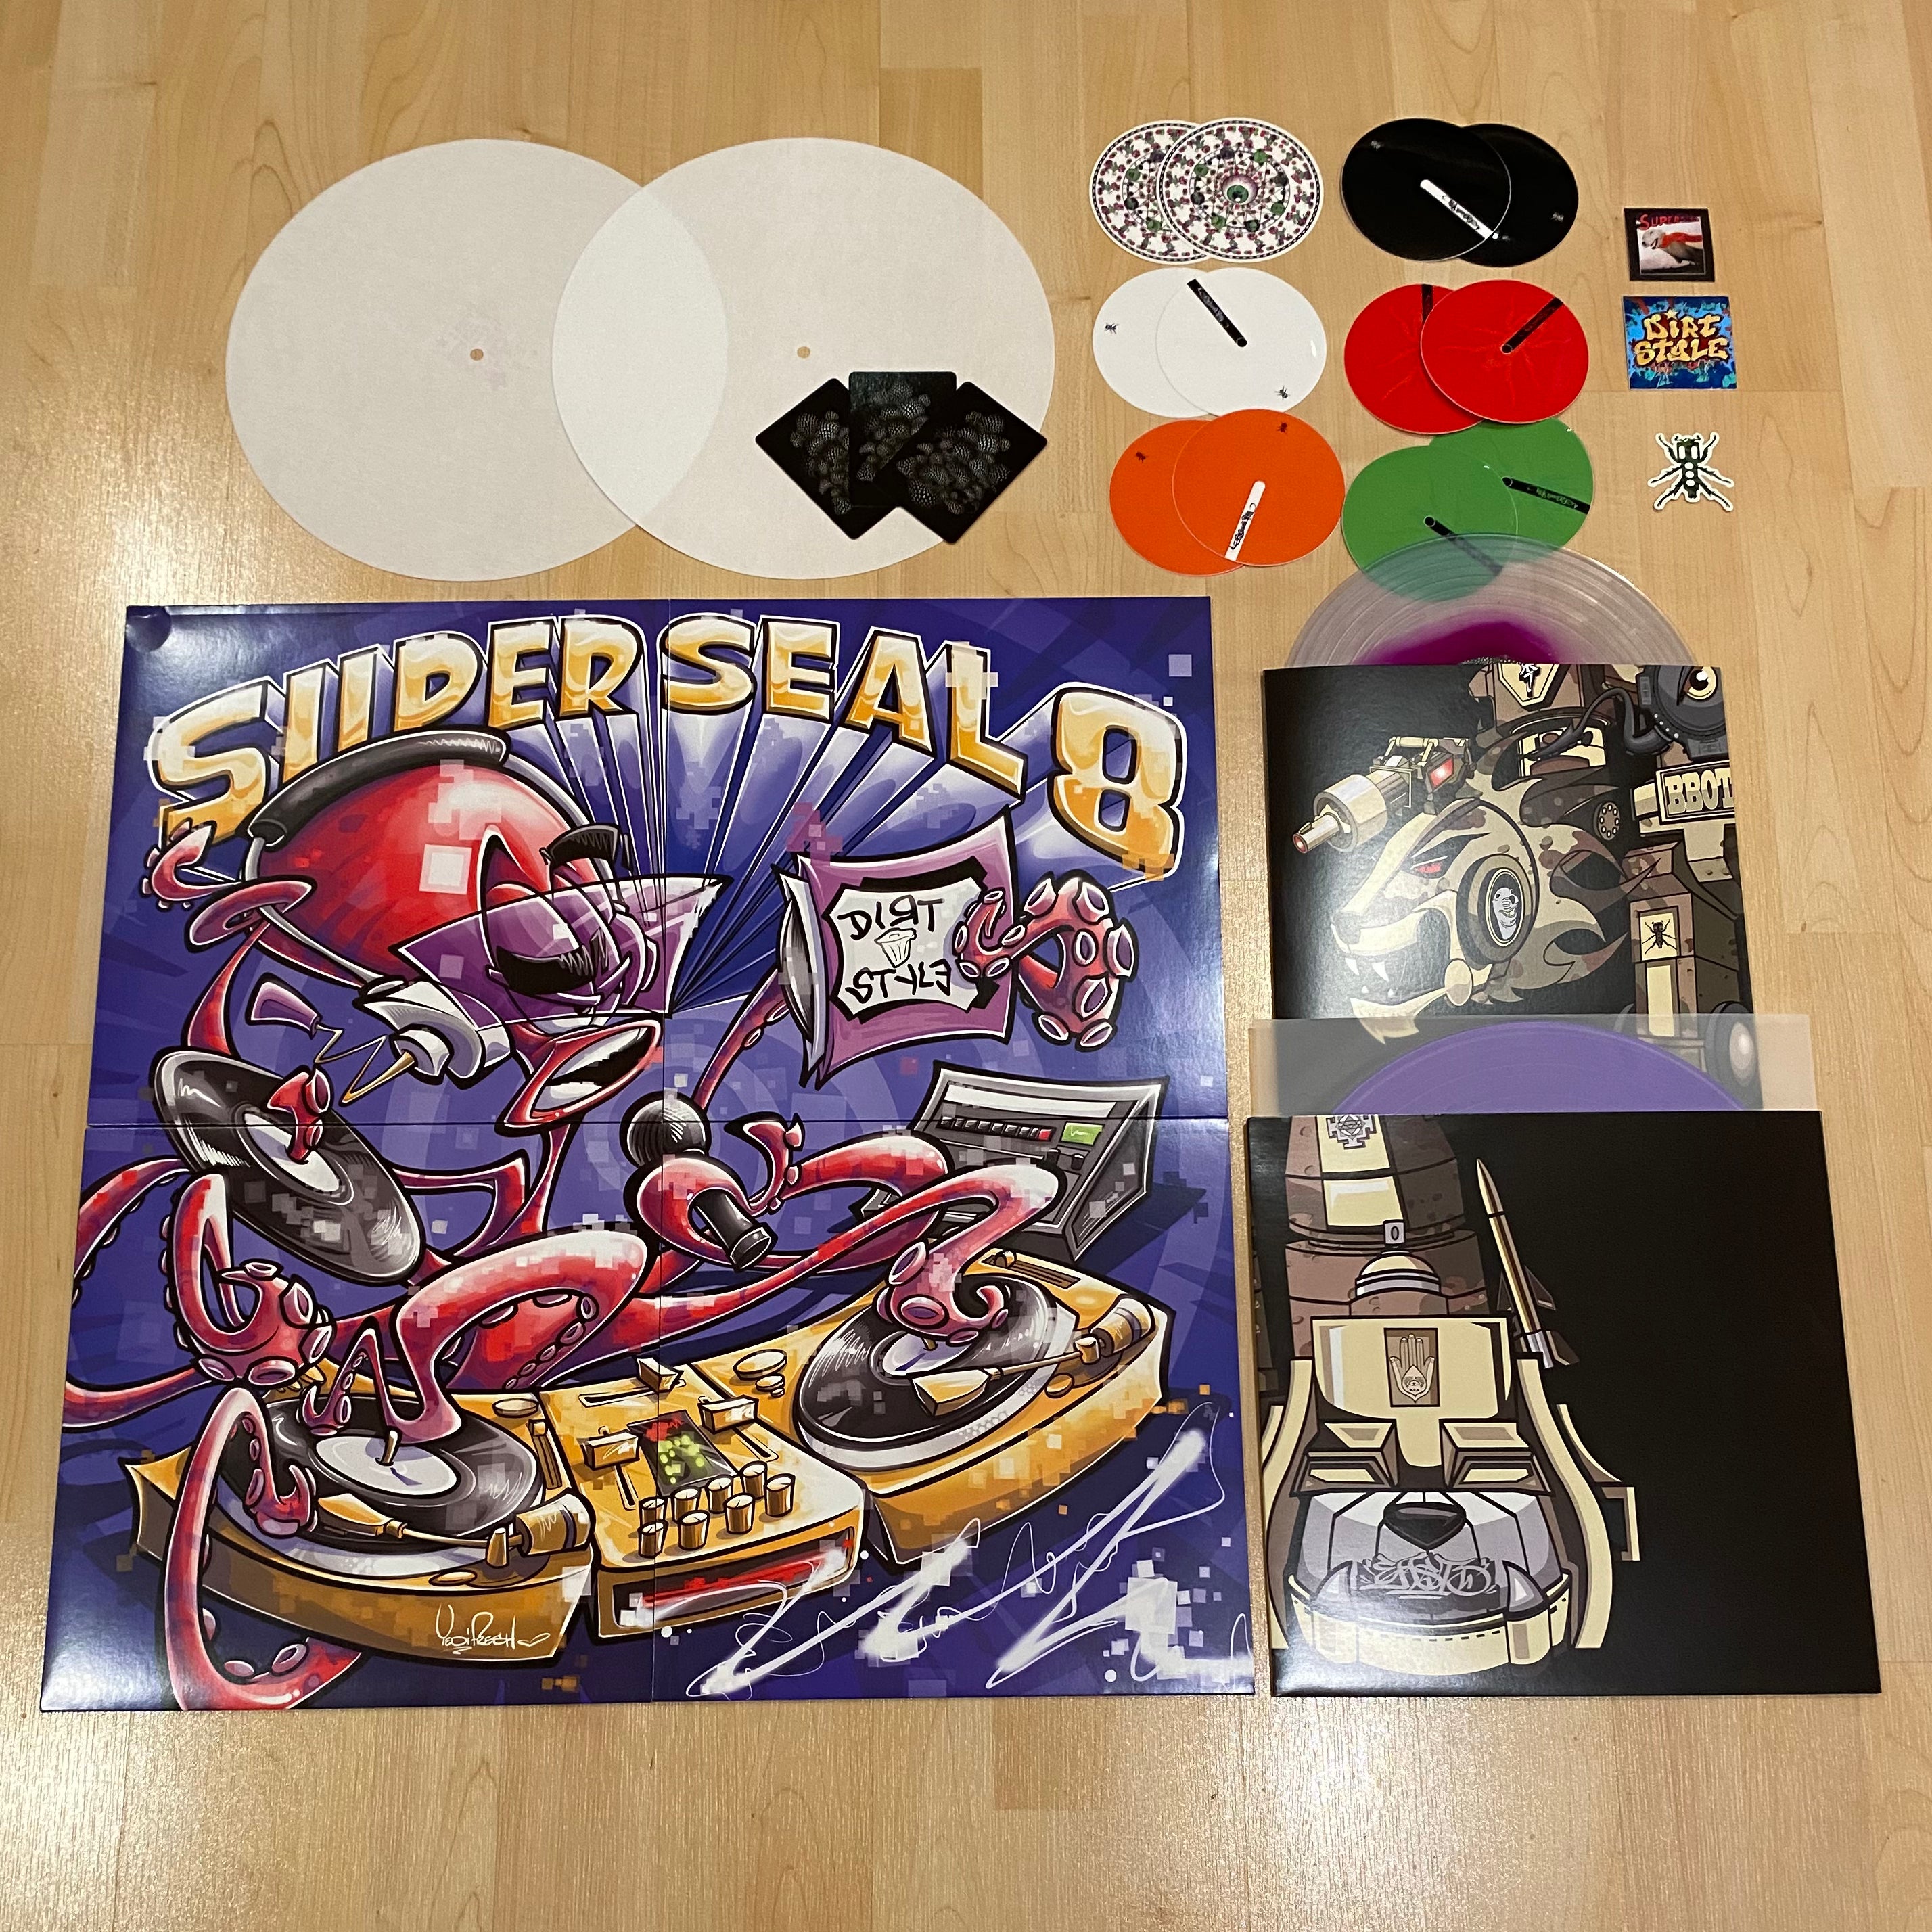 🎁 Superseal 8 Set 12” Vinyl + SUPERSEAL VII R ARM & L FOOT + 2 White Butter Rugs & Table Labels w 3 Mystery Trading Cards!!! WOW!!!